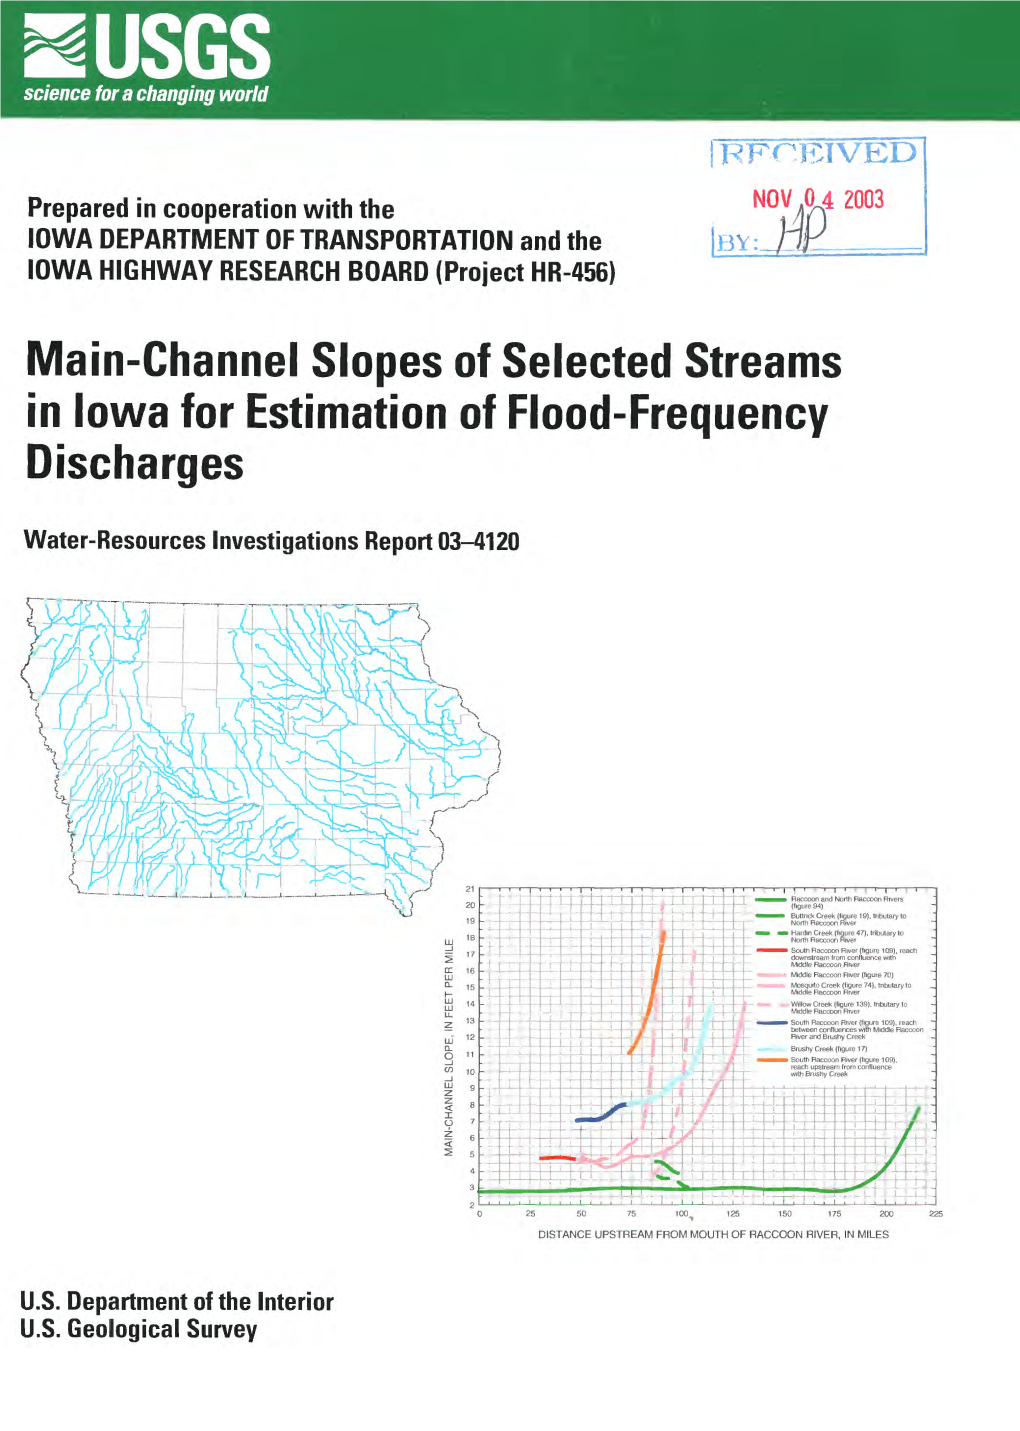 Main-Channel Slopes of Selected Streams in Iowa for Estimation of Flood-Frequency Discharges